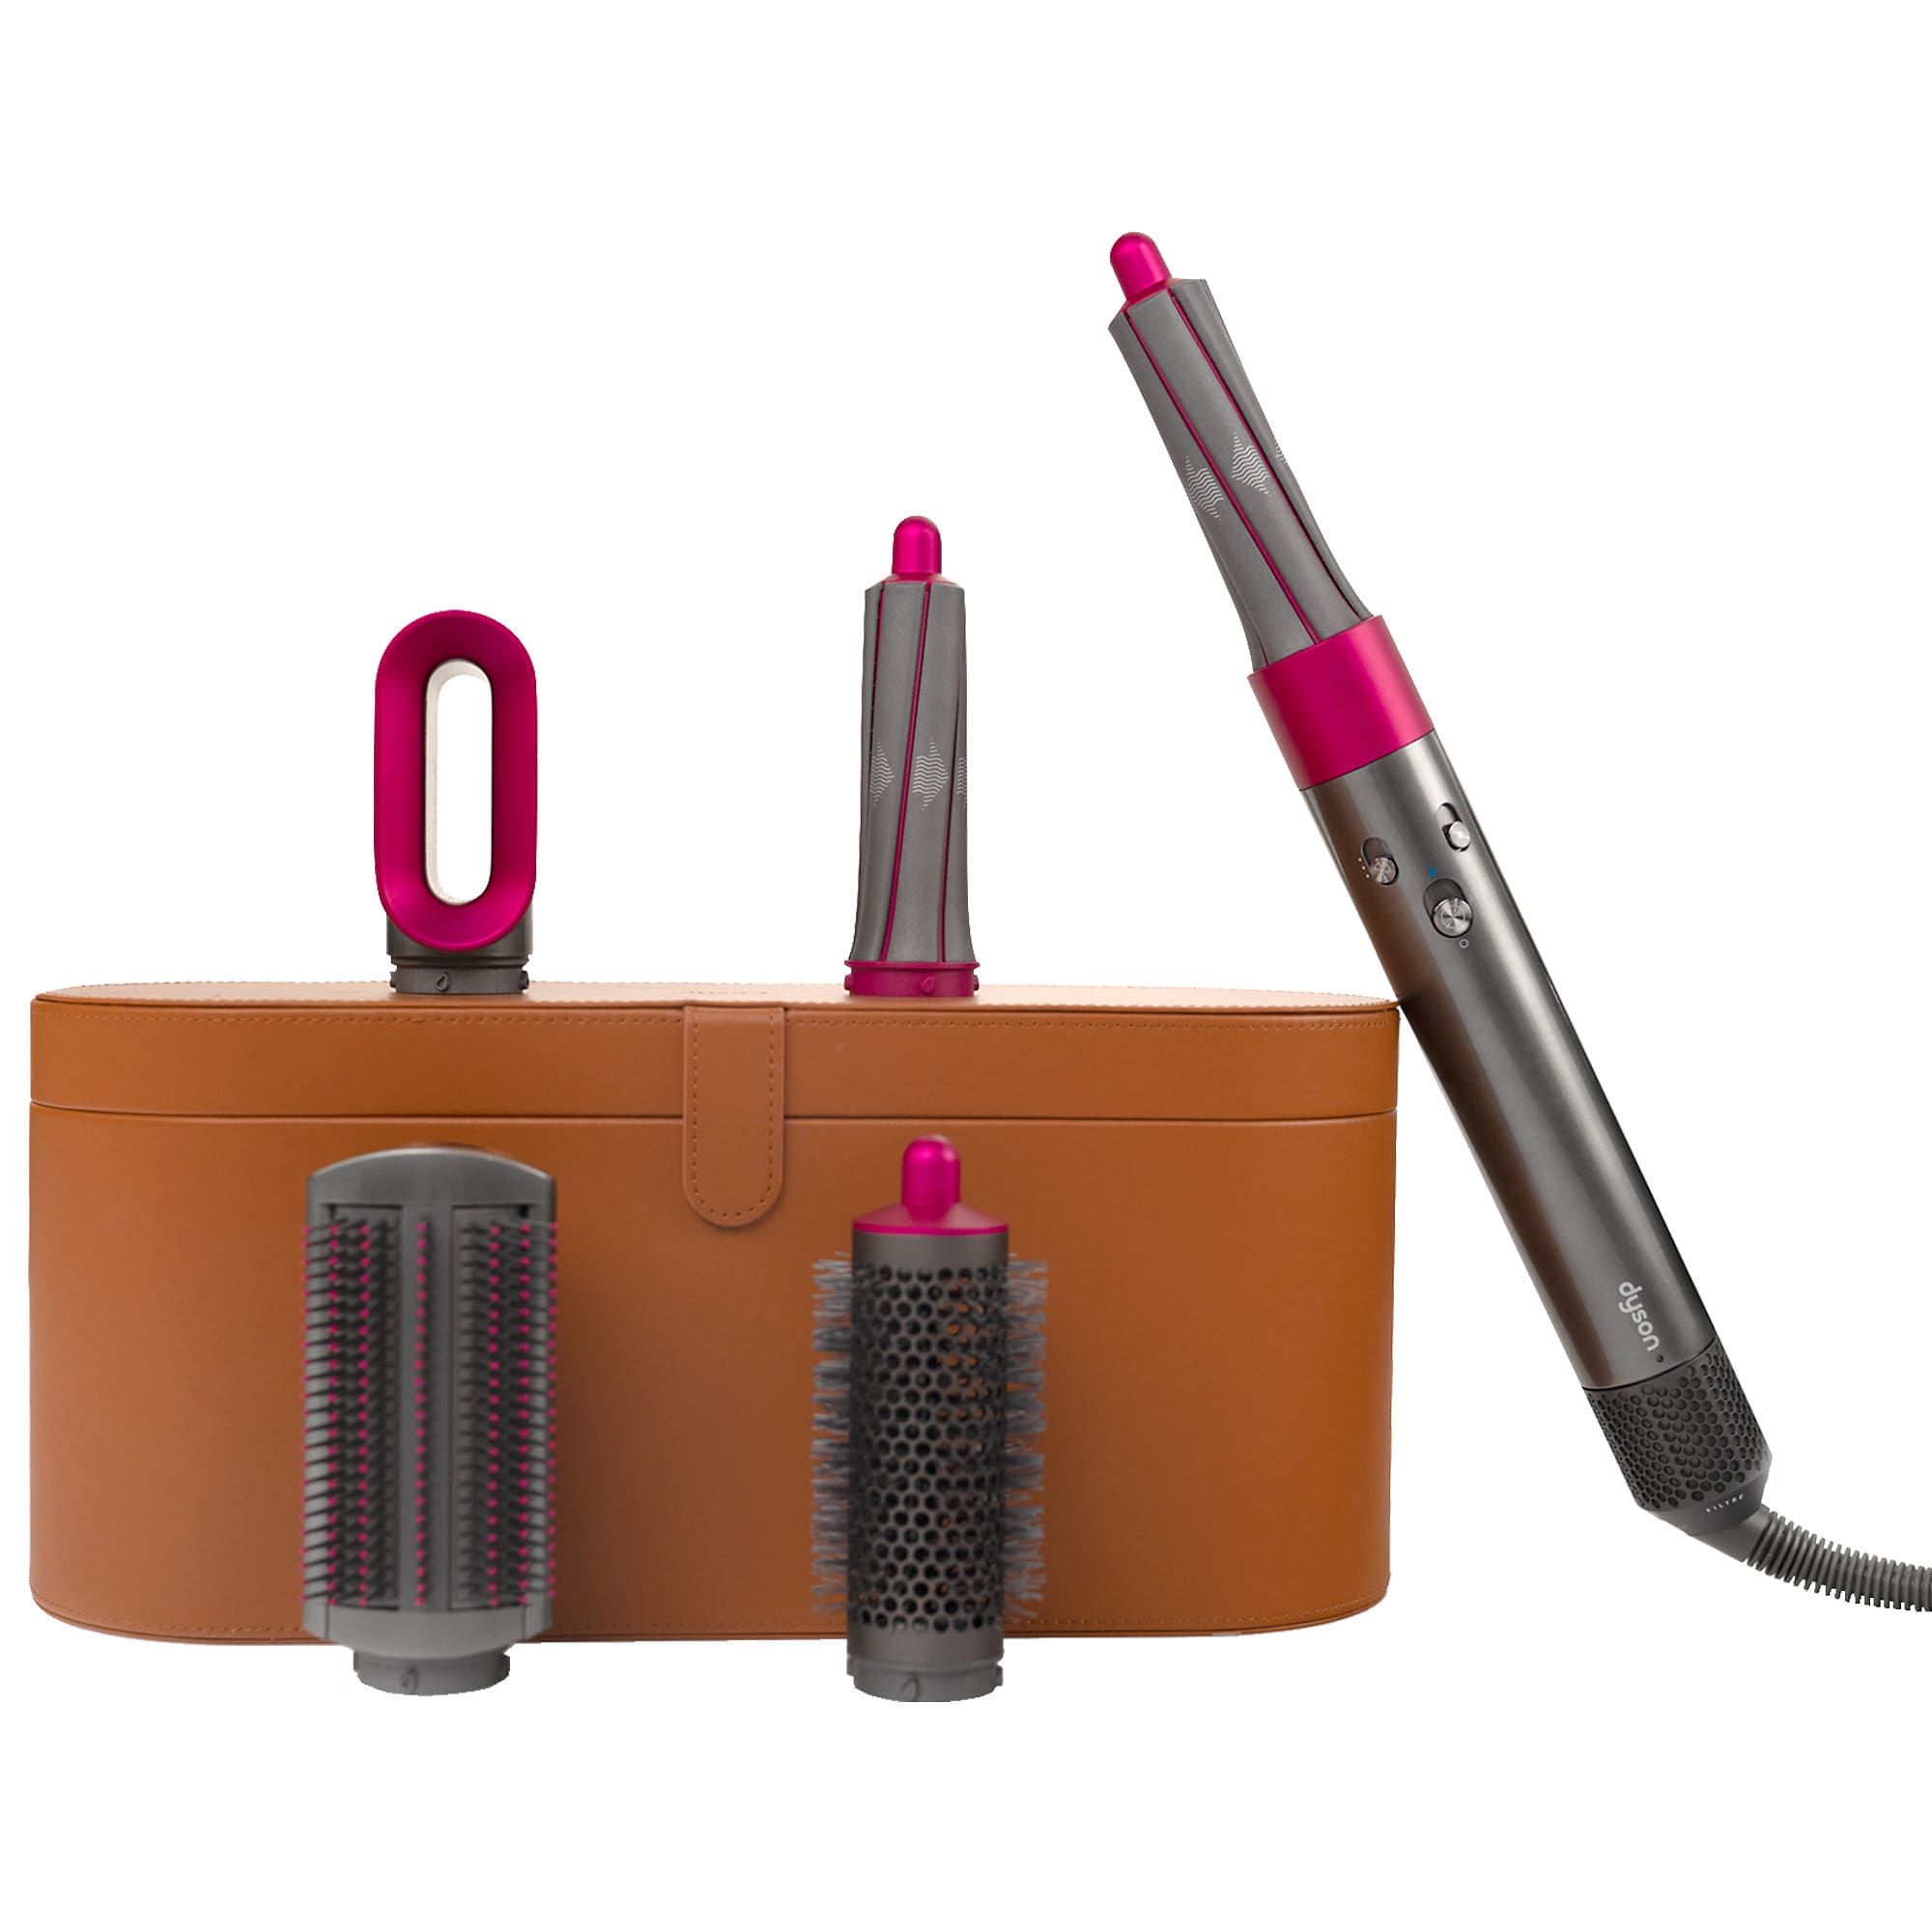 Dyson Airwrap Hair Styler Review Is the Dyson Airwrap Tool Worth It?